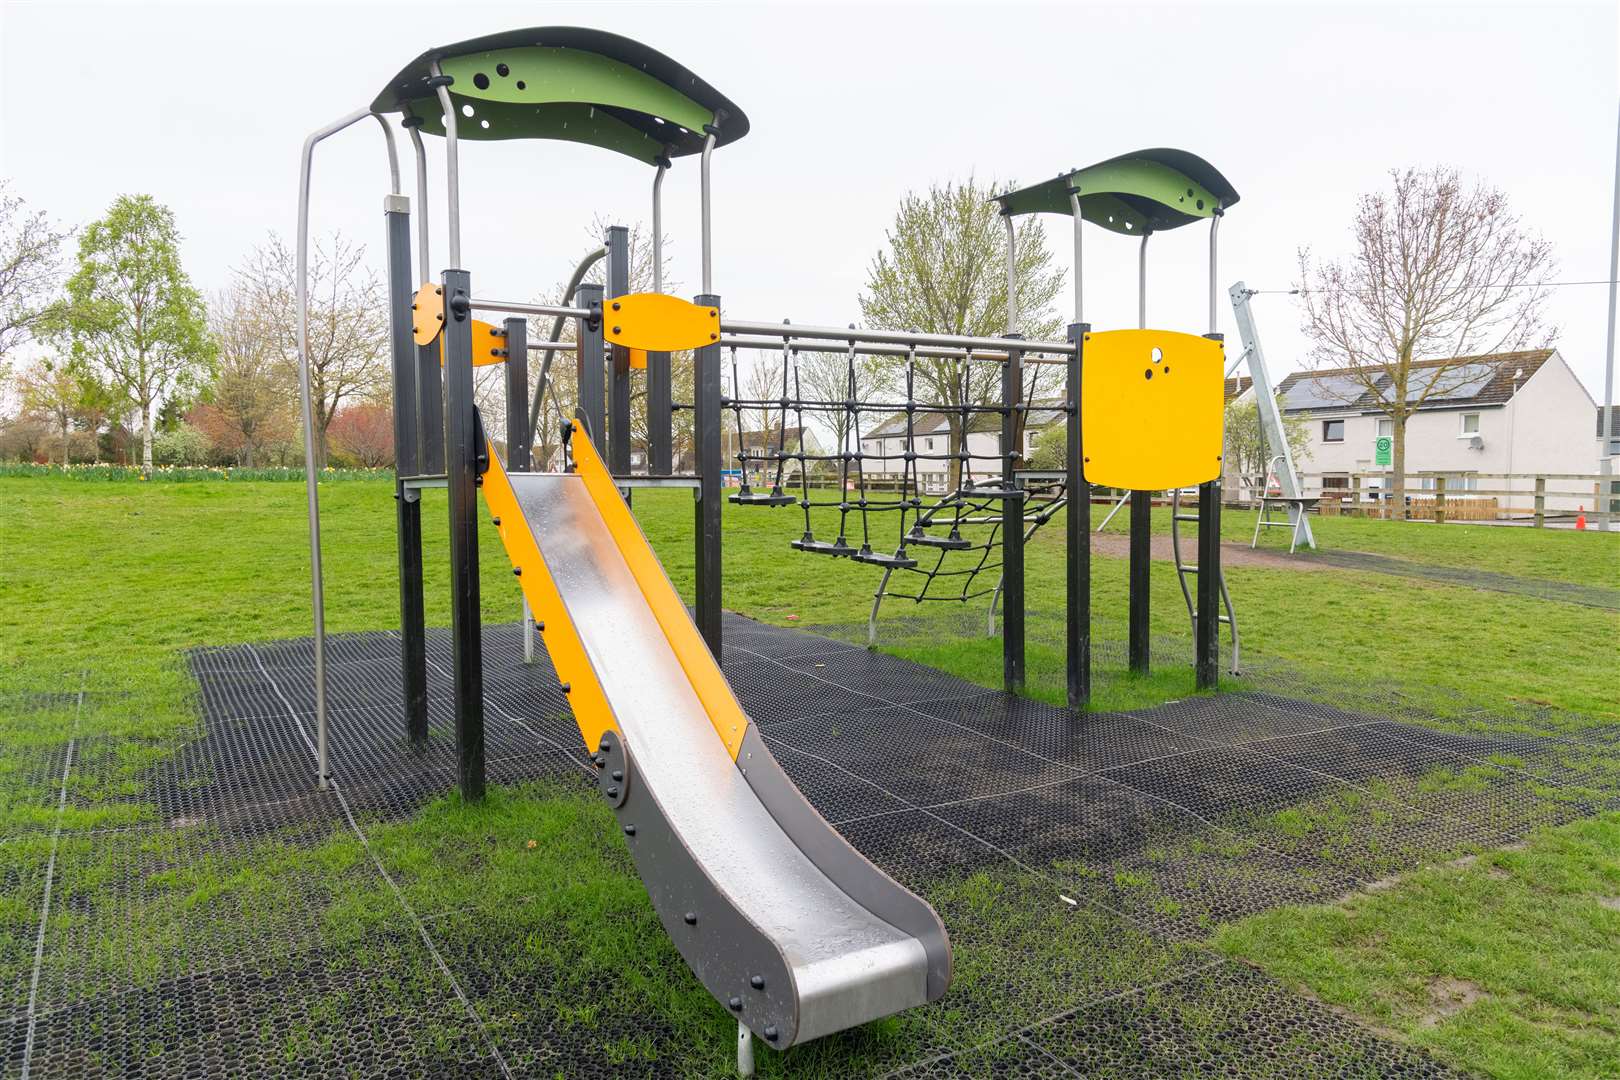 Another slide and climbing unit.